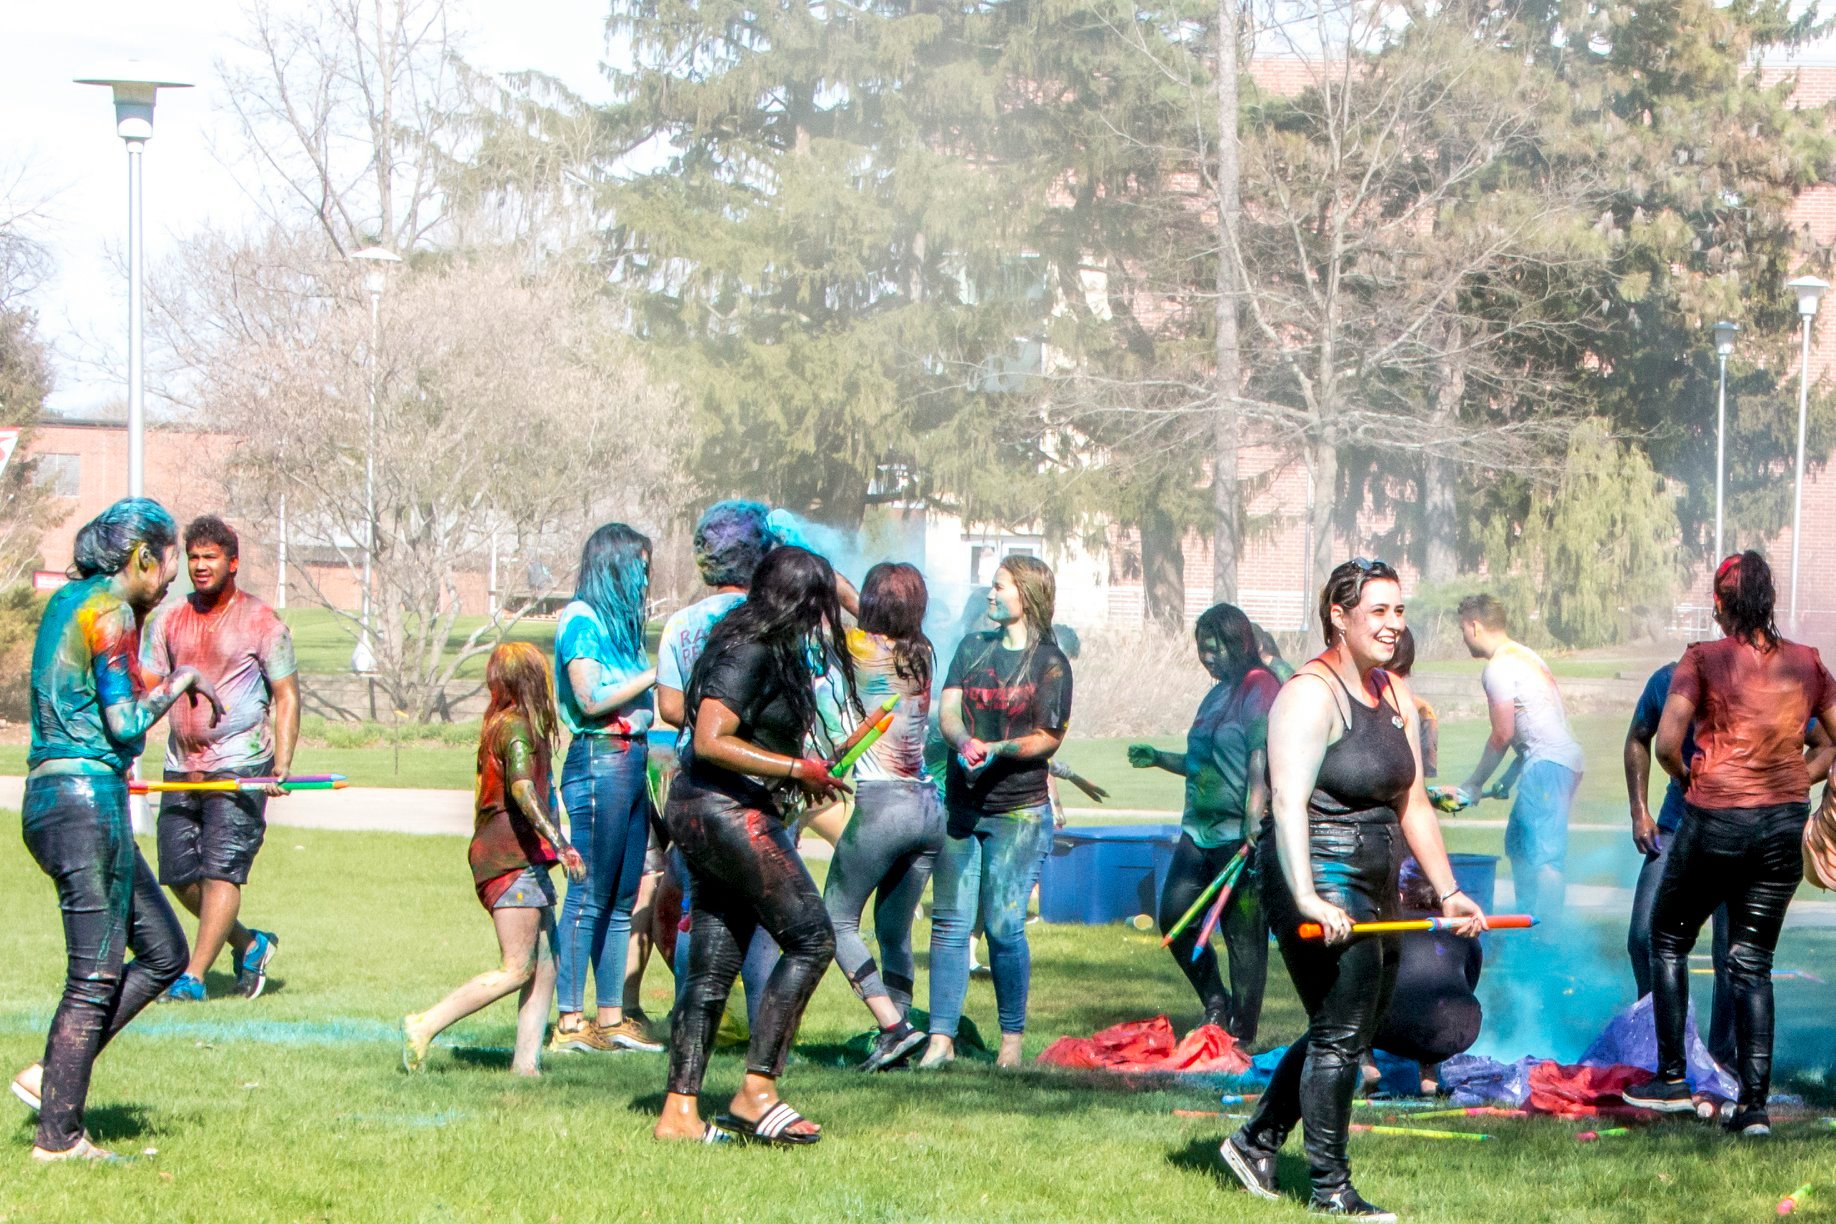 Students celebrating Holi, covered in colorful chalk powder